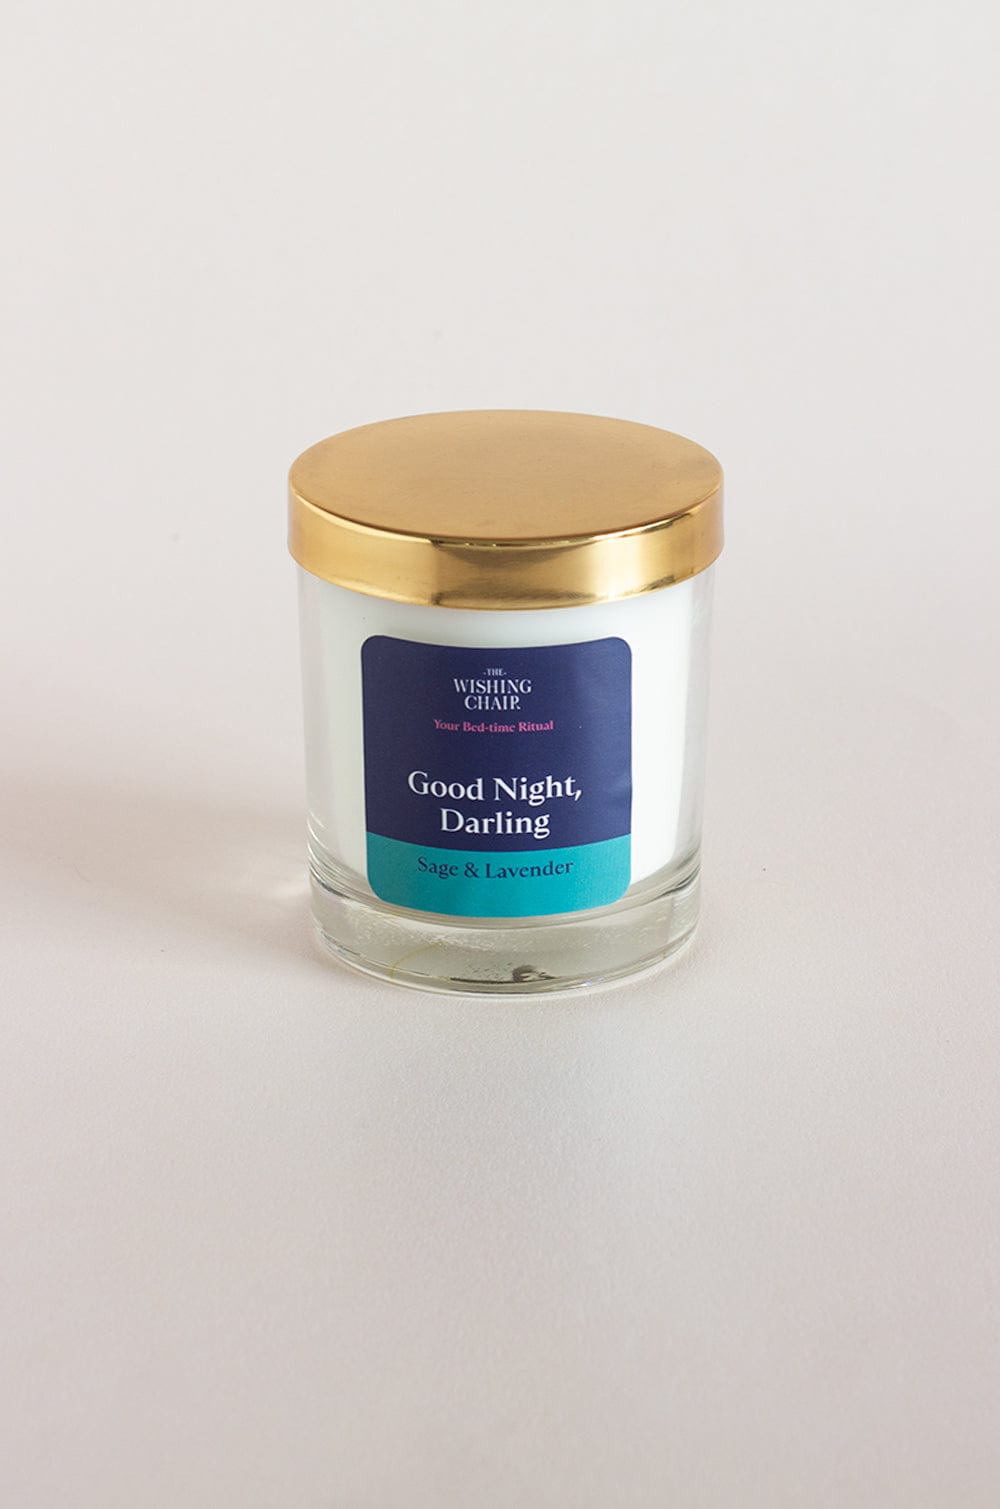 Good Night, Darling Soy Wax Scented Candle- 200 gms – The Wishing ...